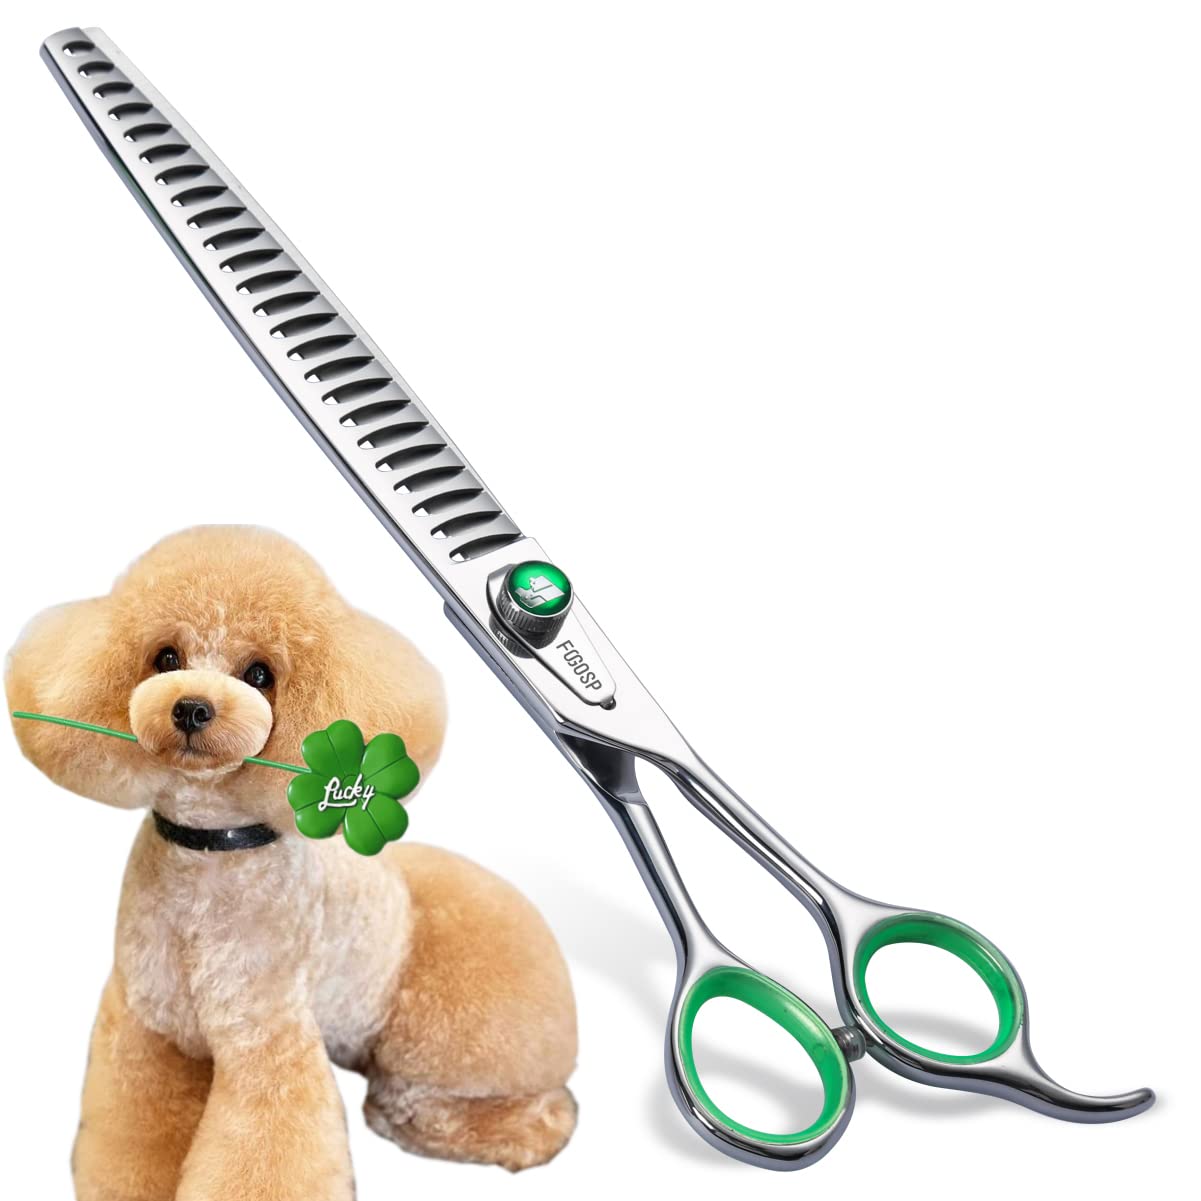 Fogosp Professional Thinning Shears For Dogs 8 Inch Dog Grooming Scissors For Pet Long Chunkers Shears Japanese 440C 70 Thinning